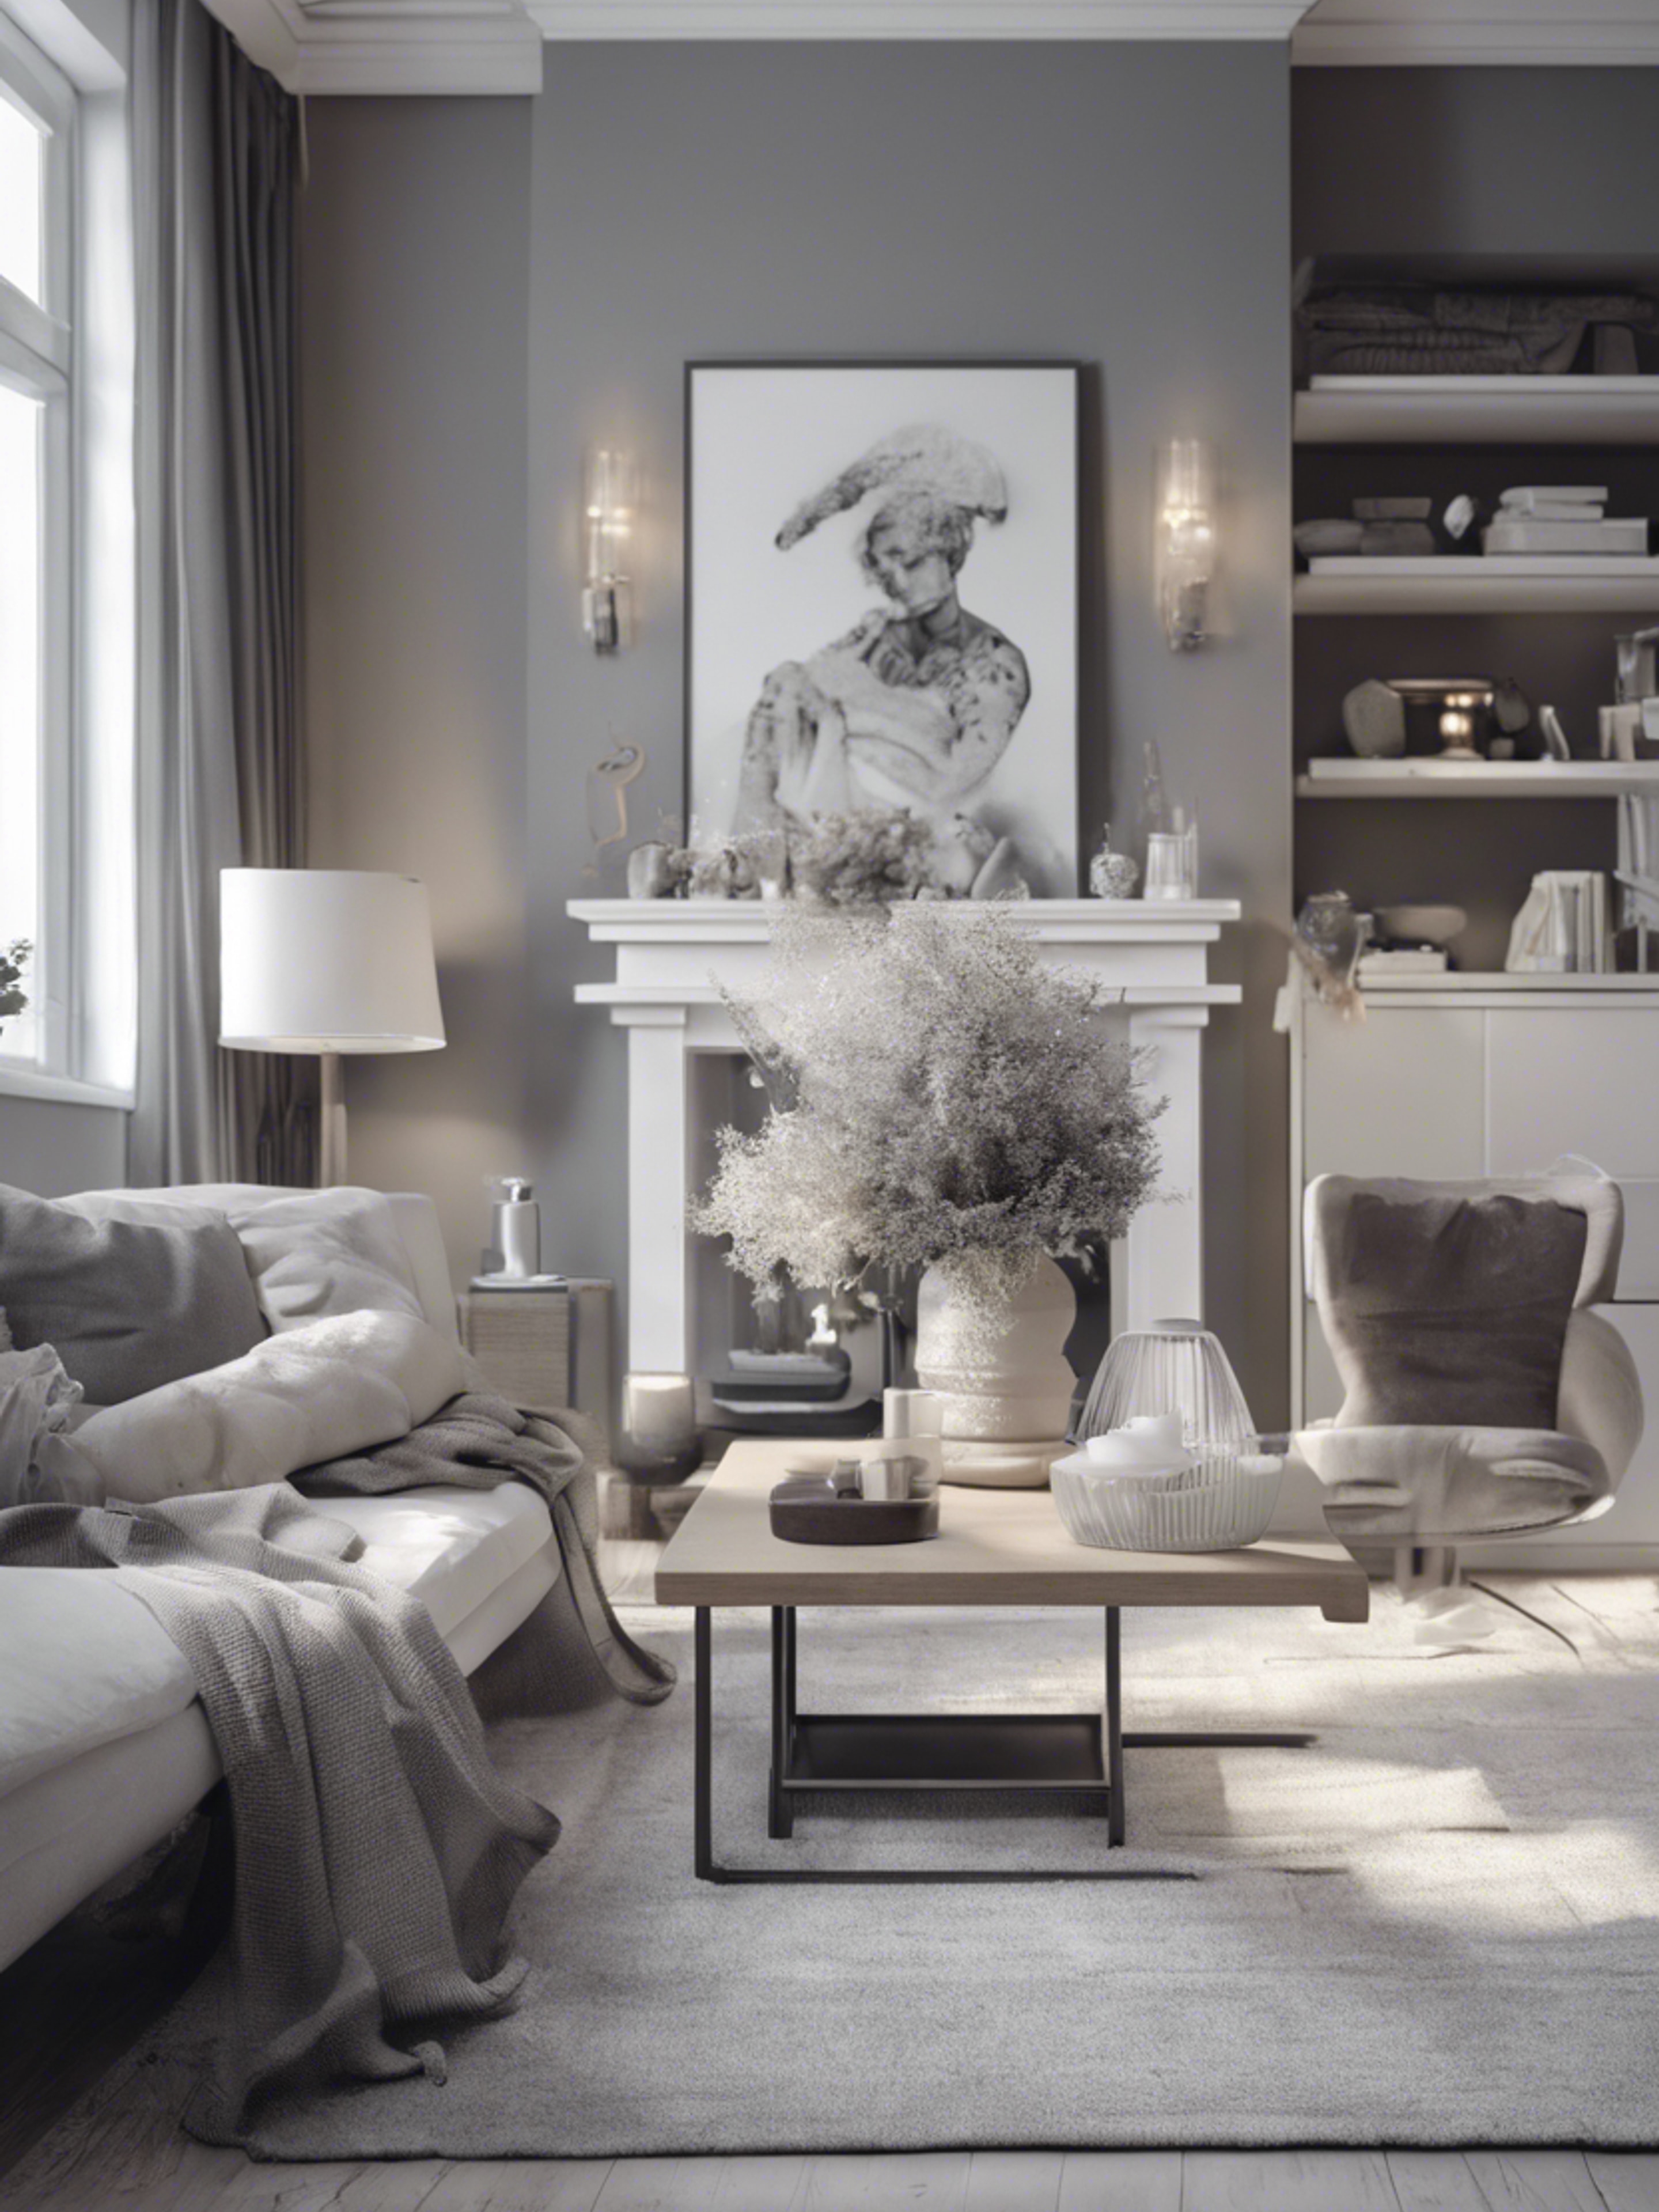 A classic interior design of a living room in neutral gray and white tones. Tapetai[b4f6eac2faba4219b360]